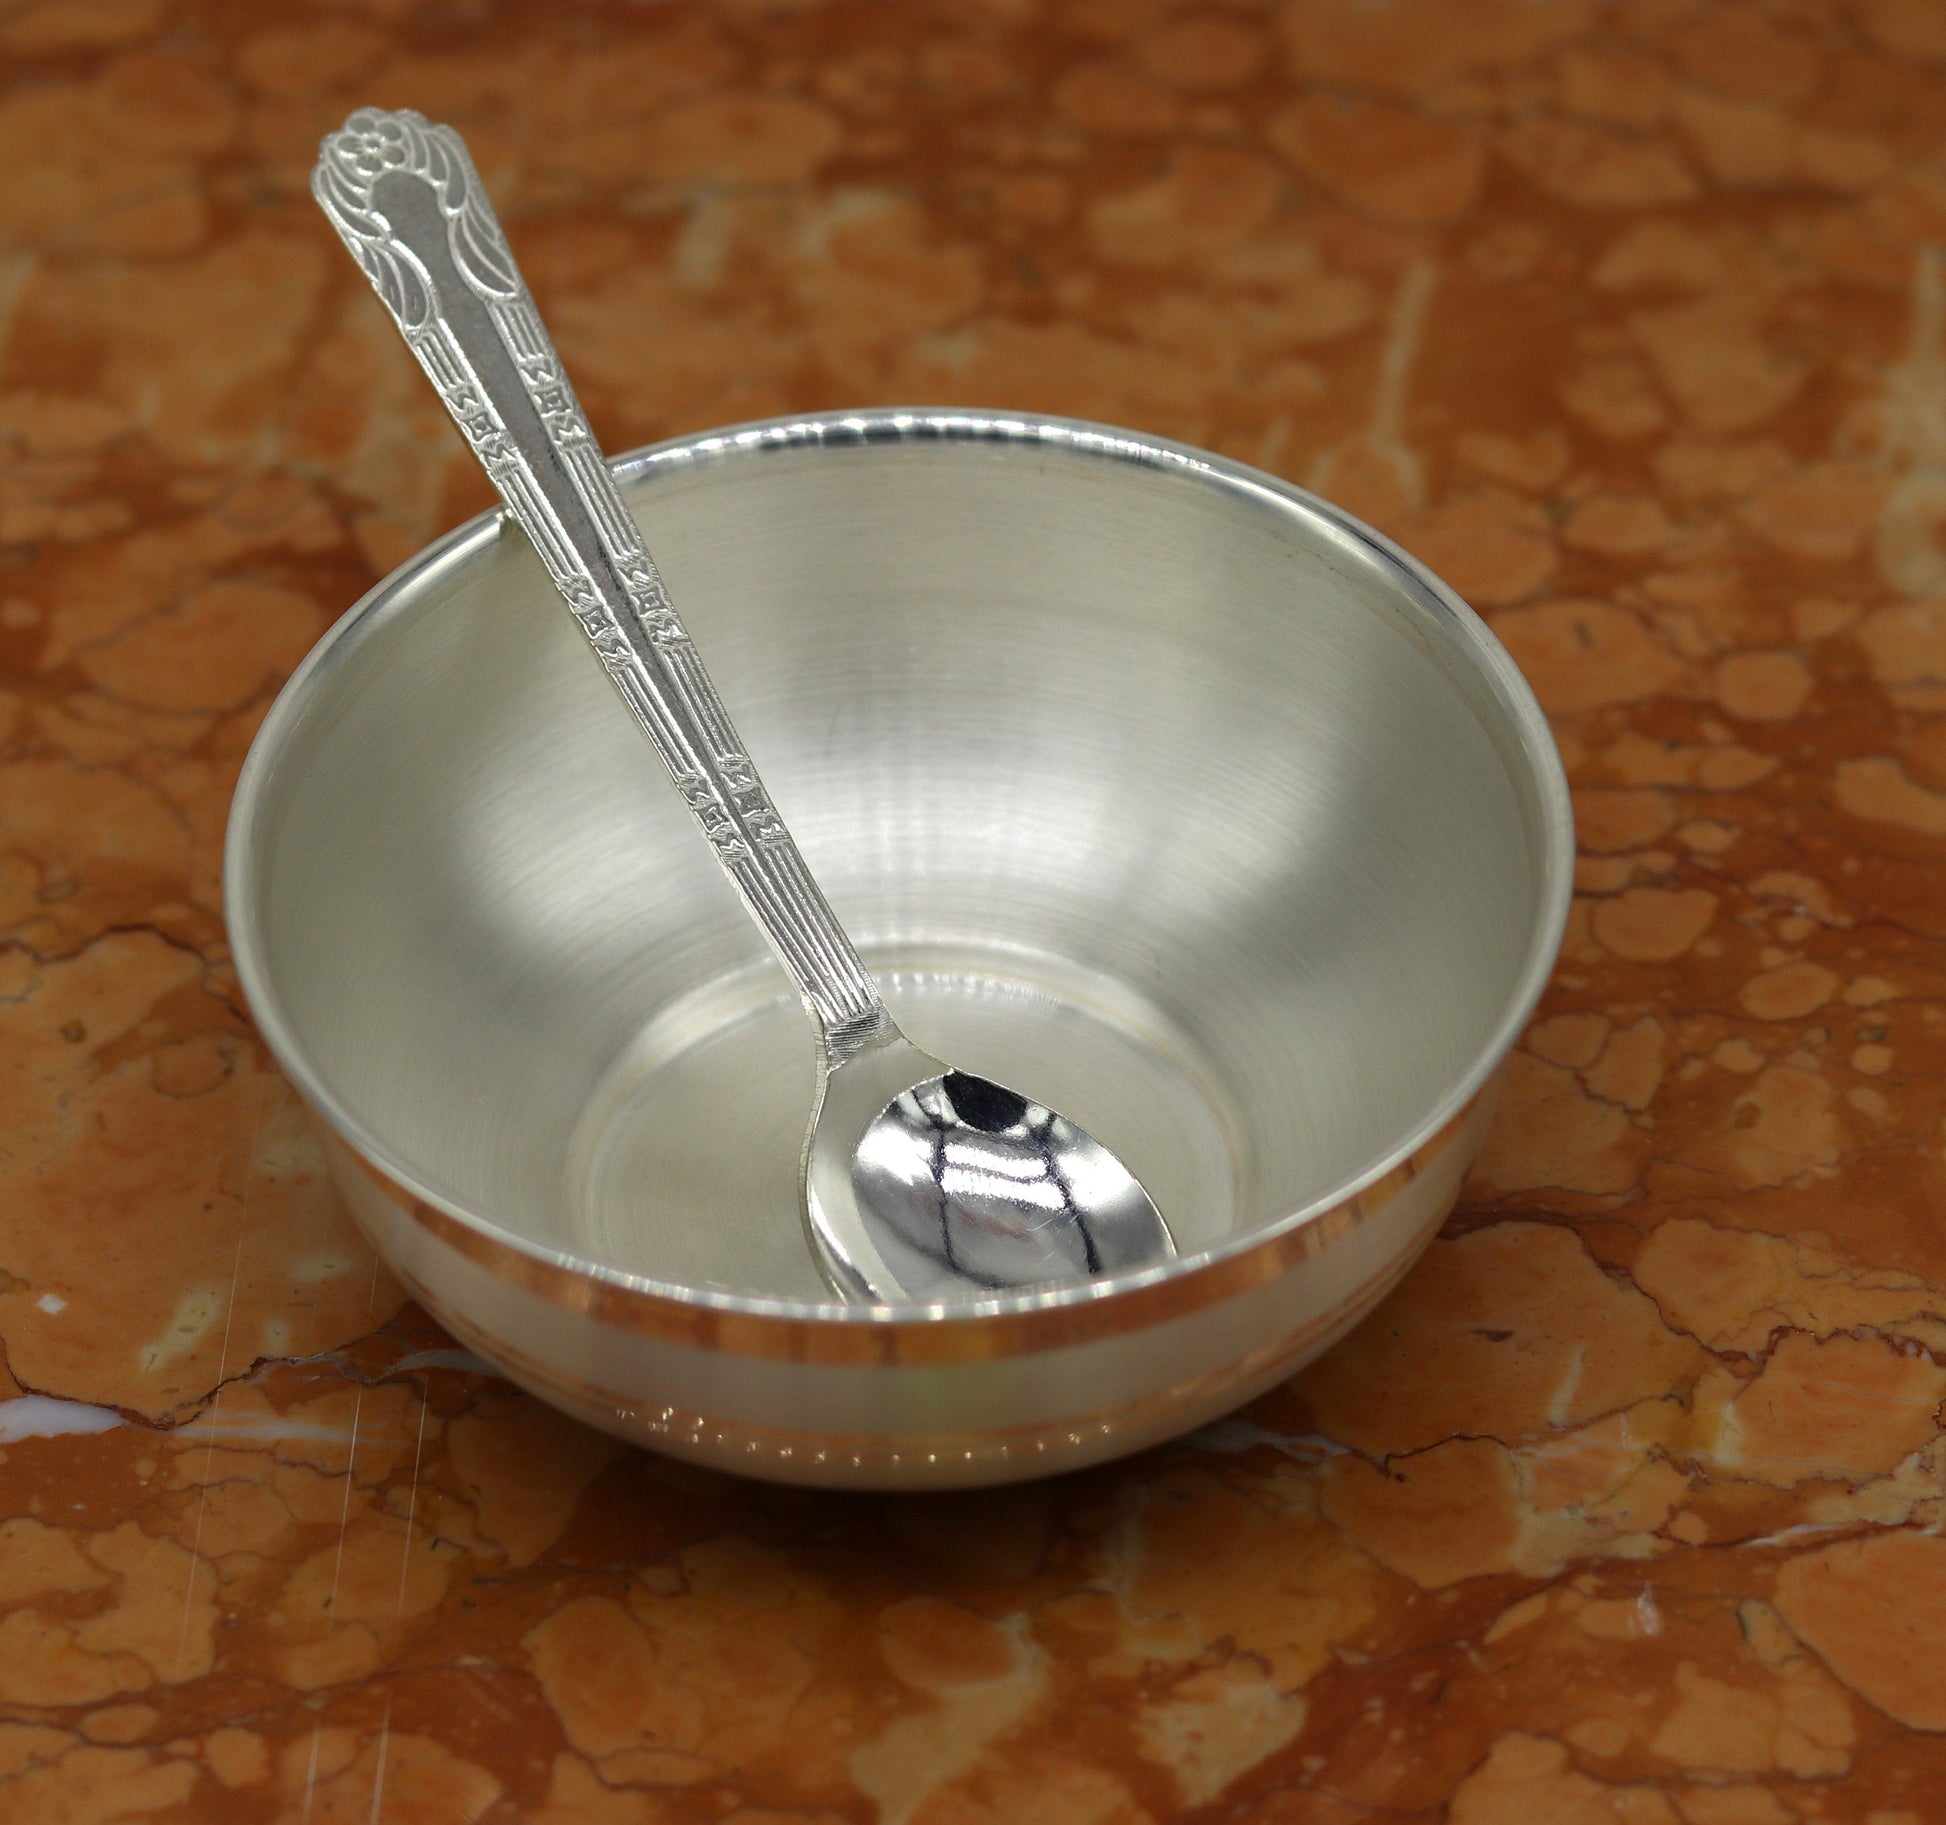 999 pure sterling silver handmade solid silver bowl and spoon, silver has antibacterial properties, keep stay healthy, silver vessels sv65 - TRIBAL ORNAMENTS